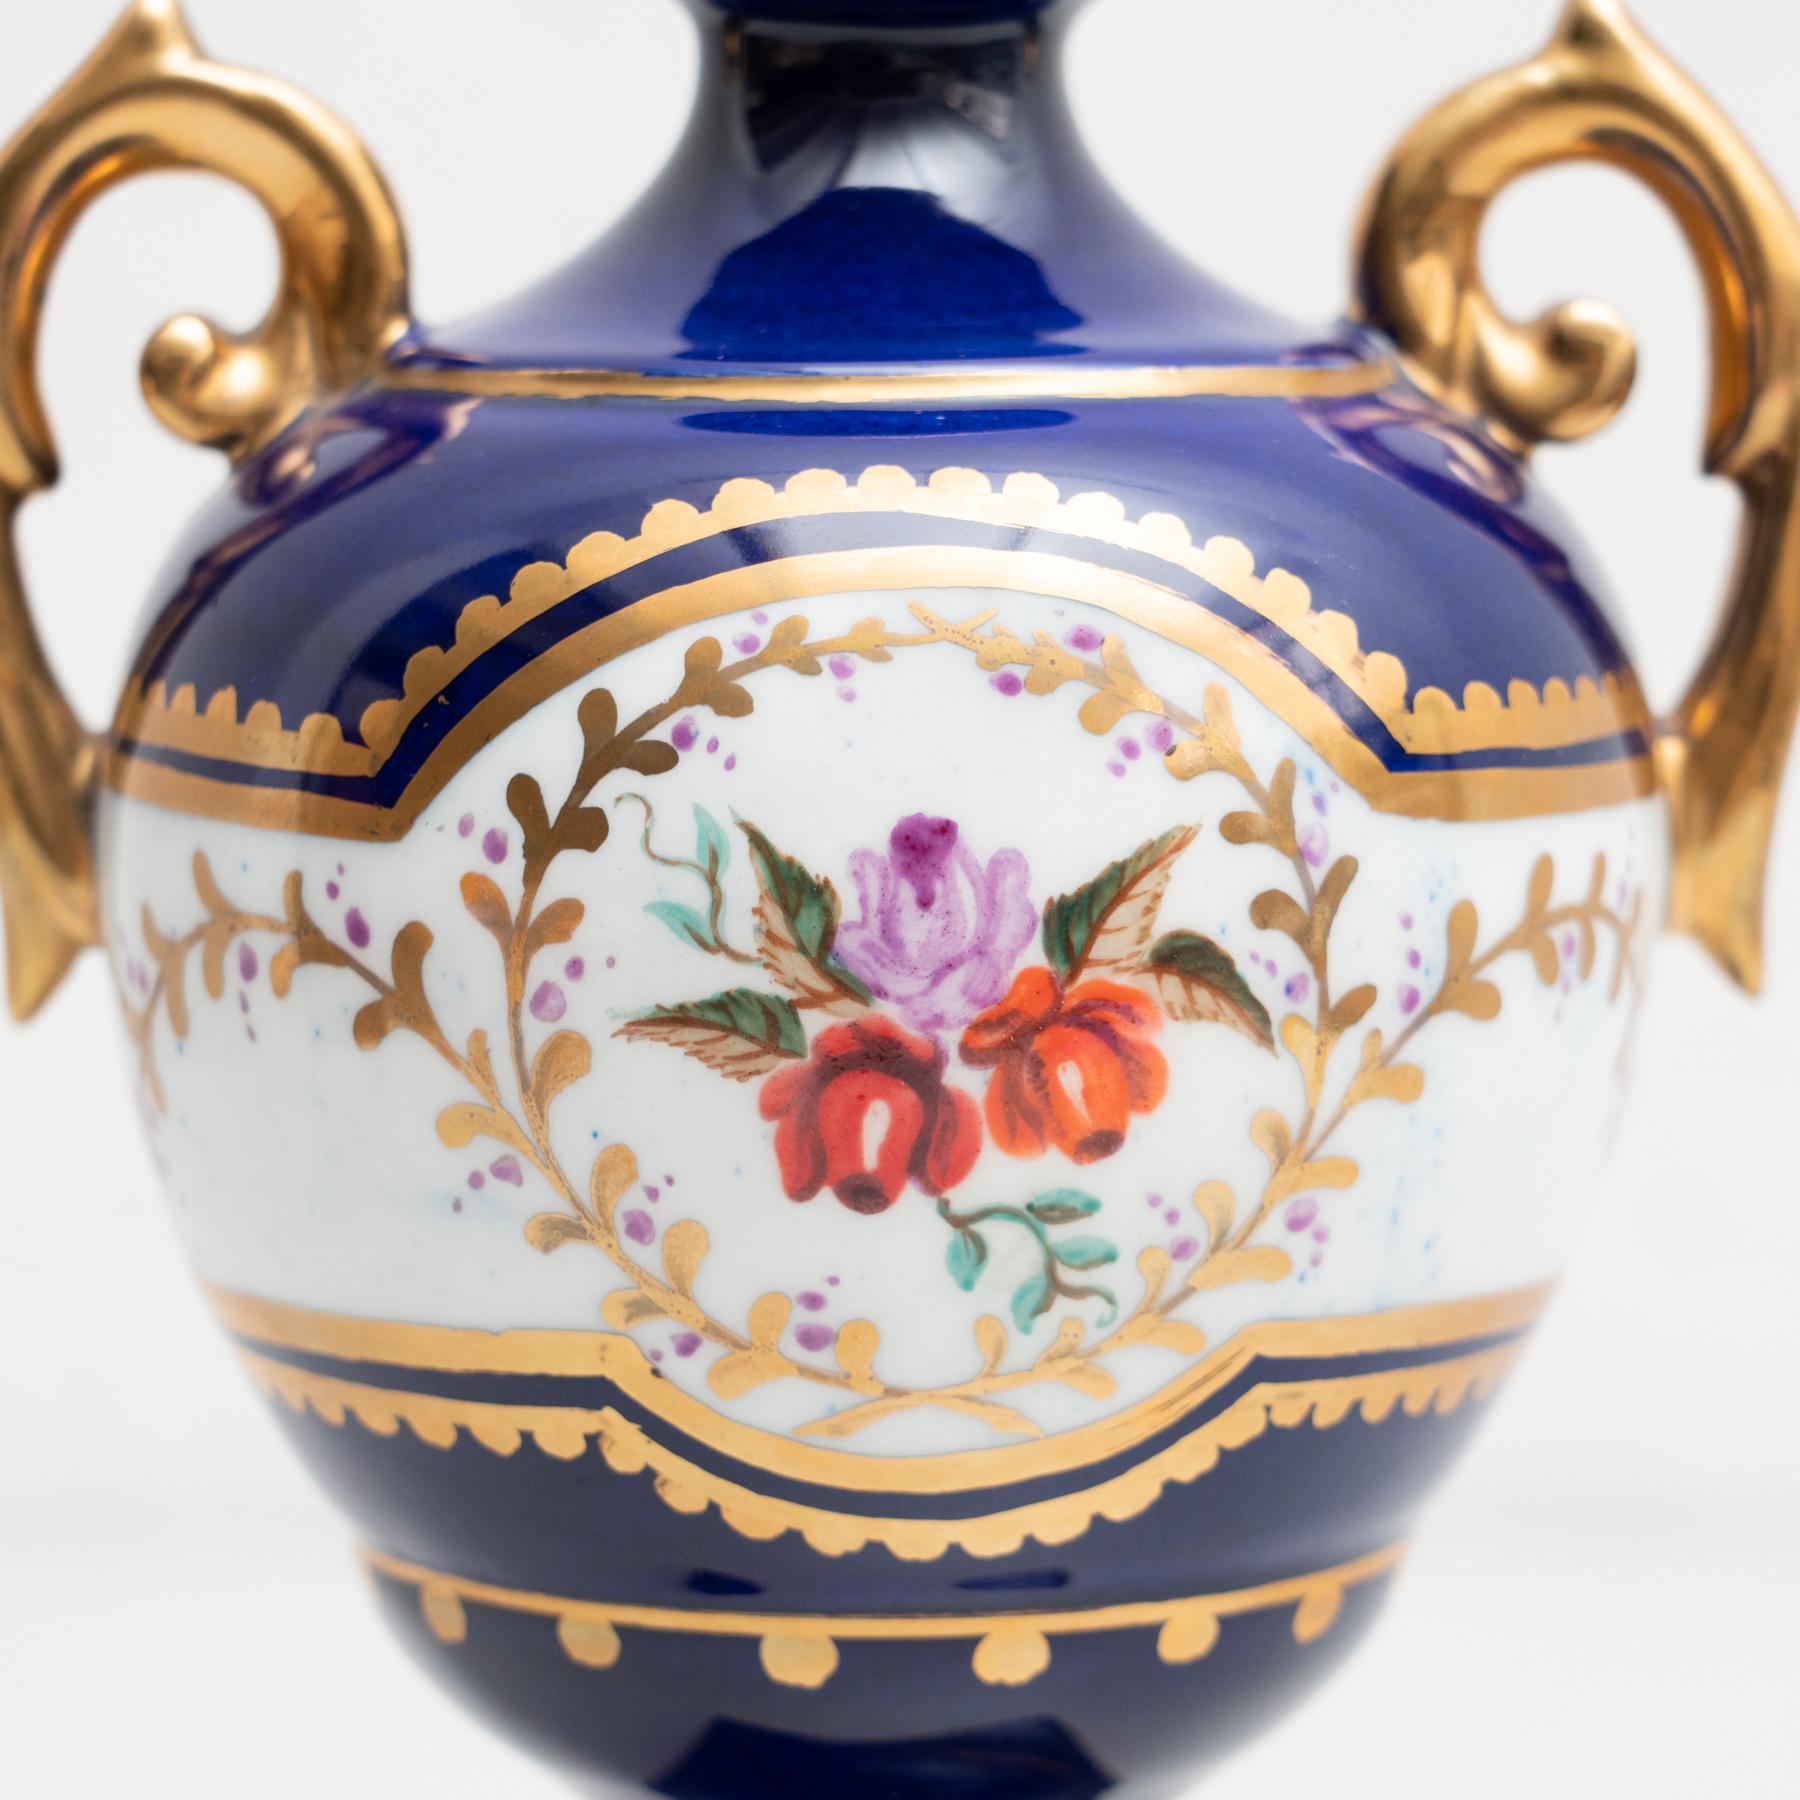 Late 19th Century Spanish Serves Style Vase For Sale 2